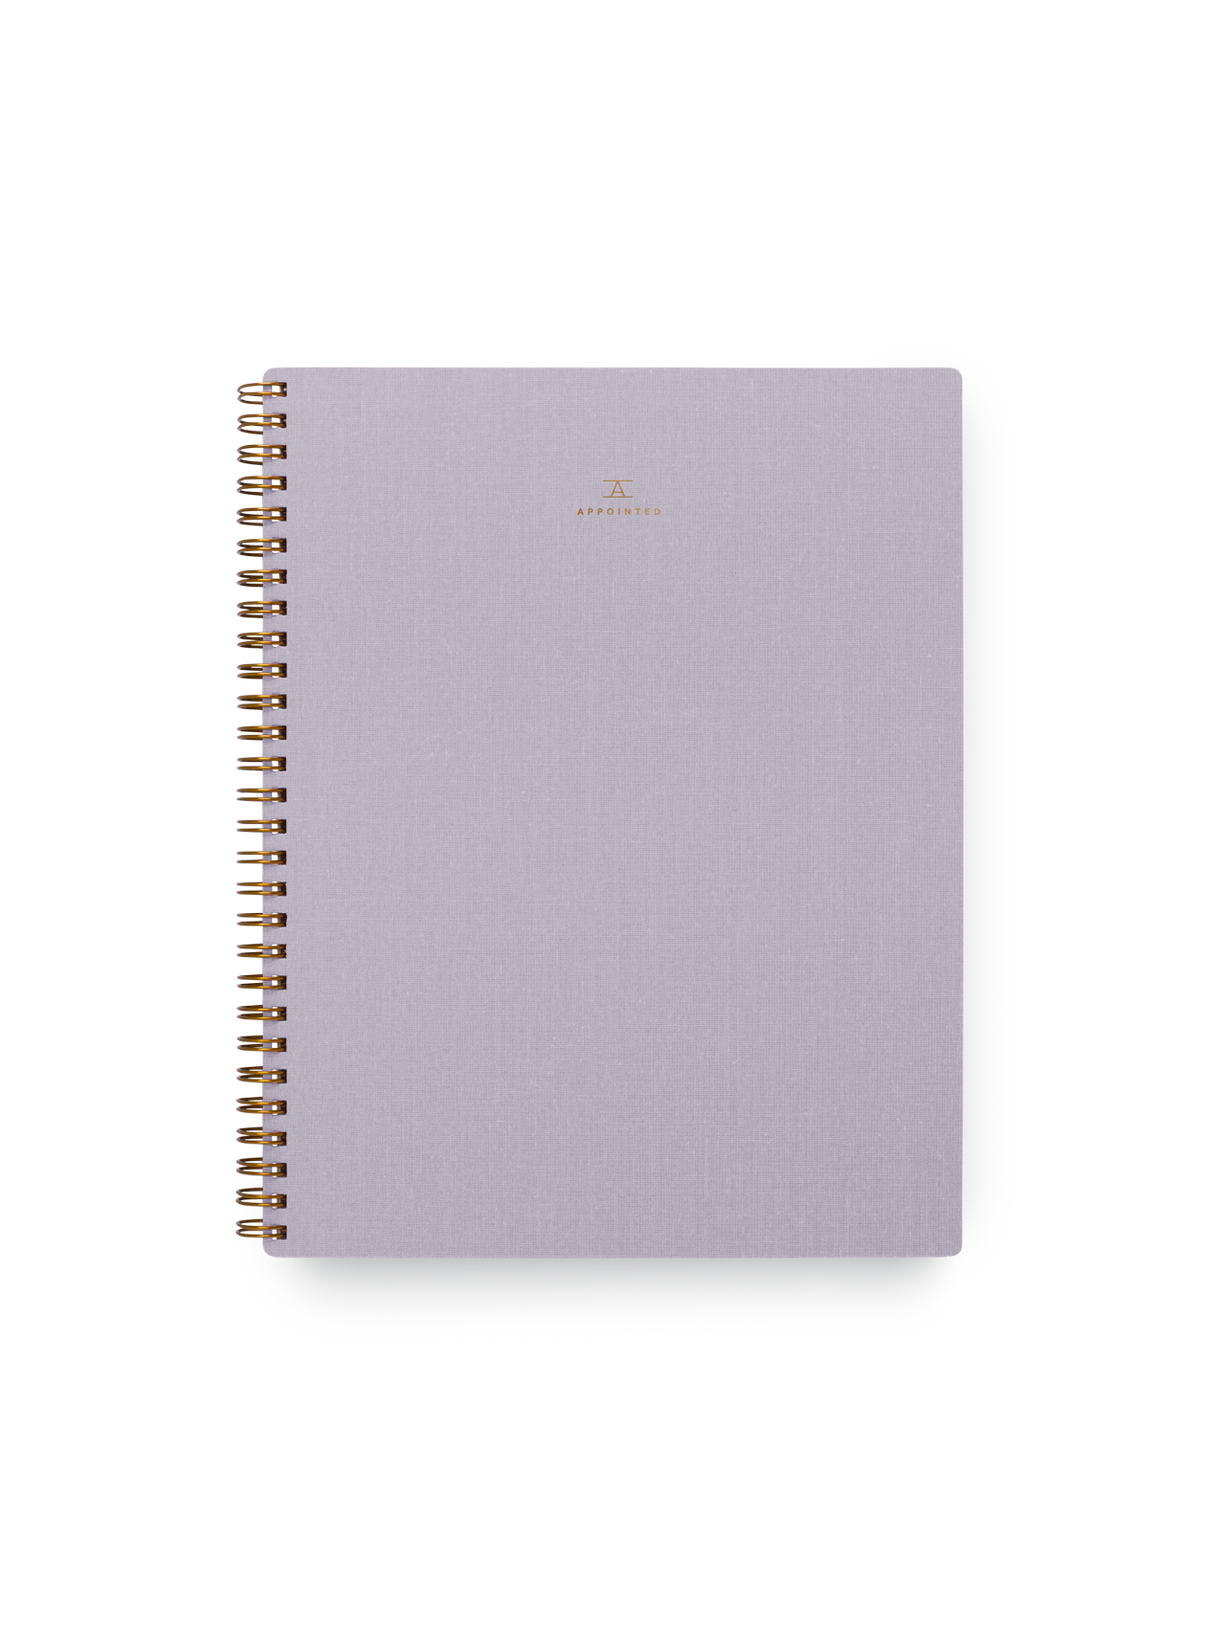 The Notebook with bookcloth covers and brass wire-o binding || Lavender Gray